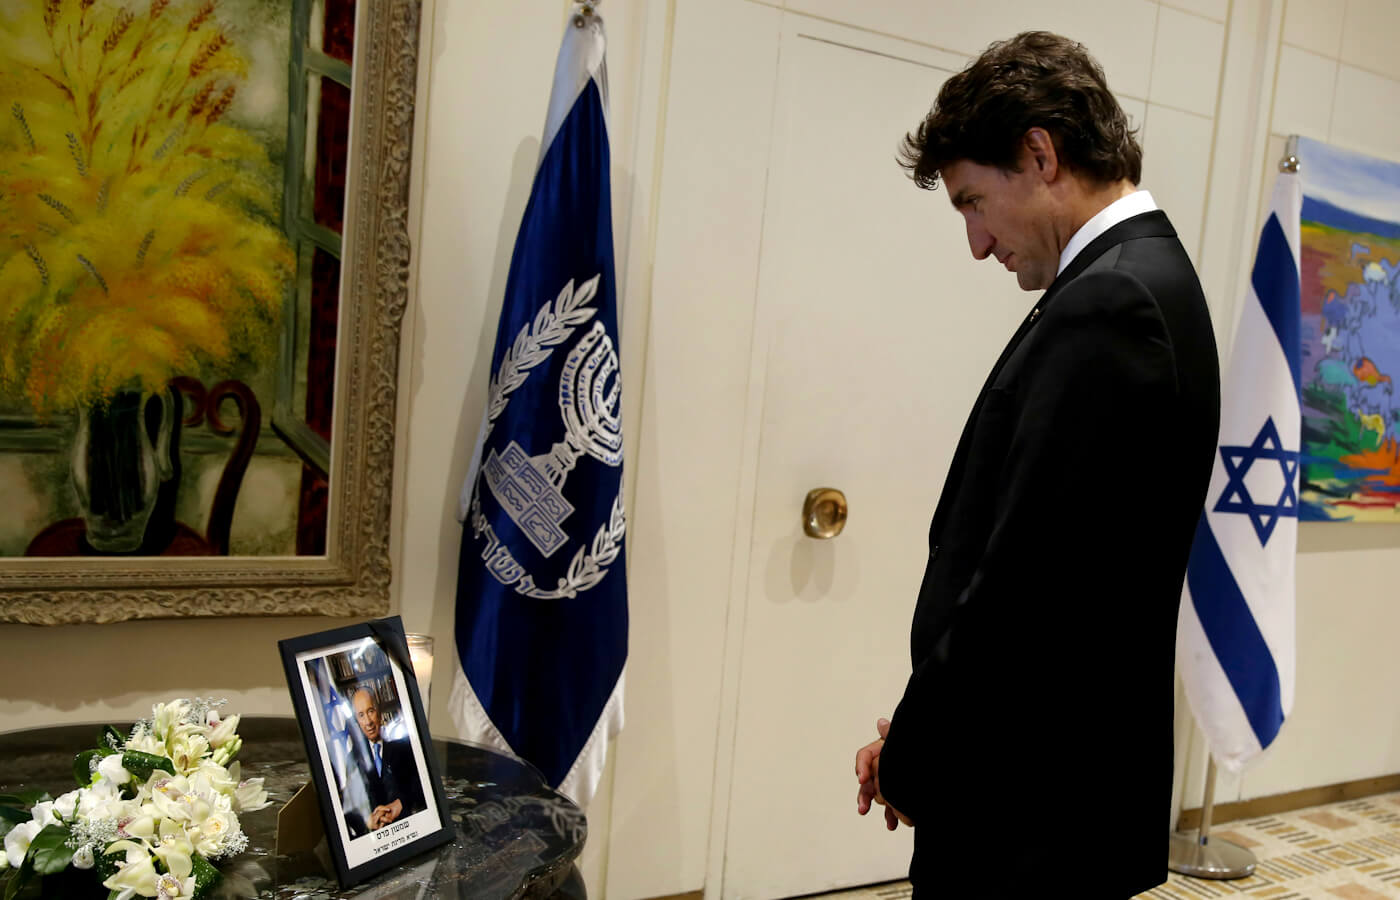 Justin Trudeau Isael Peres Funeral